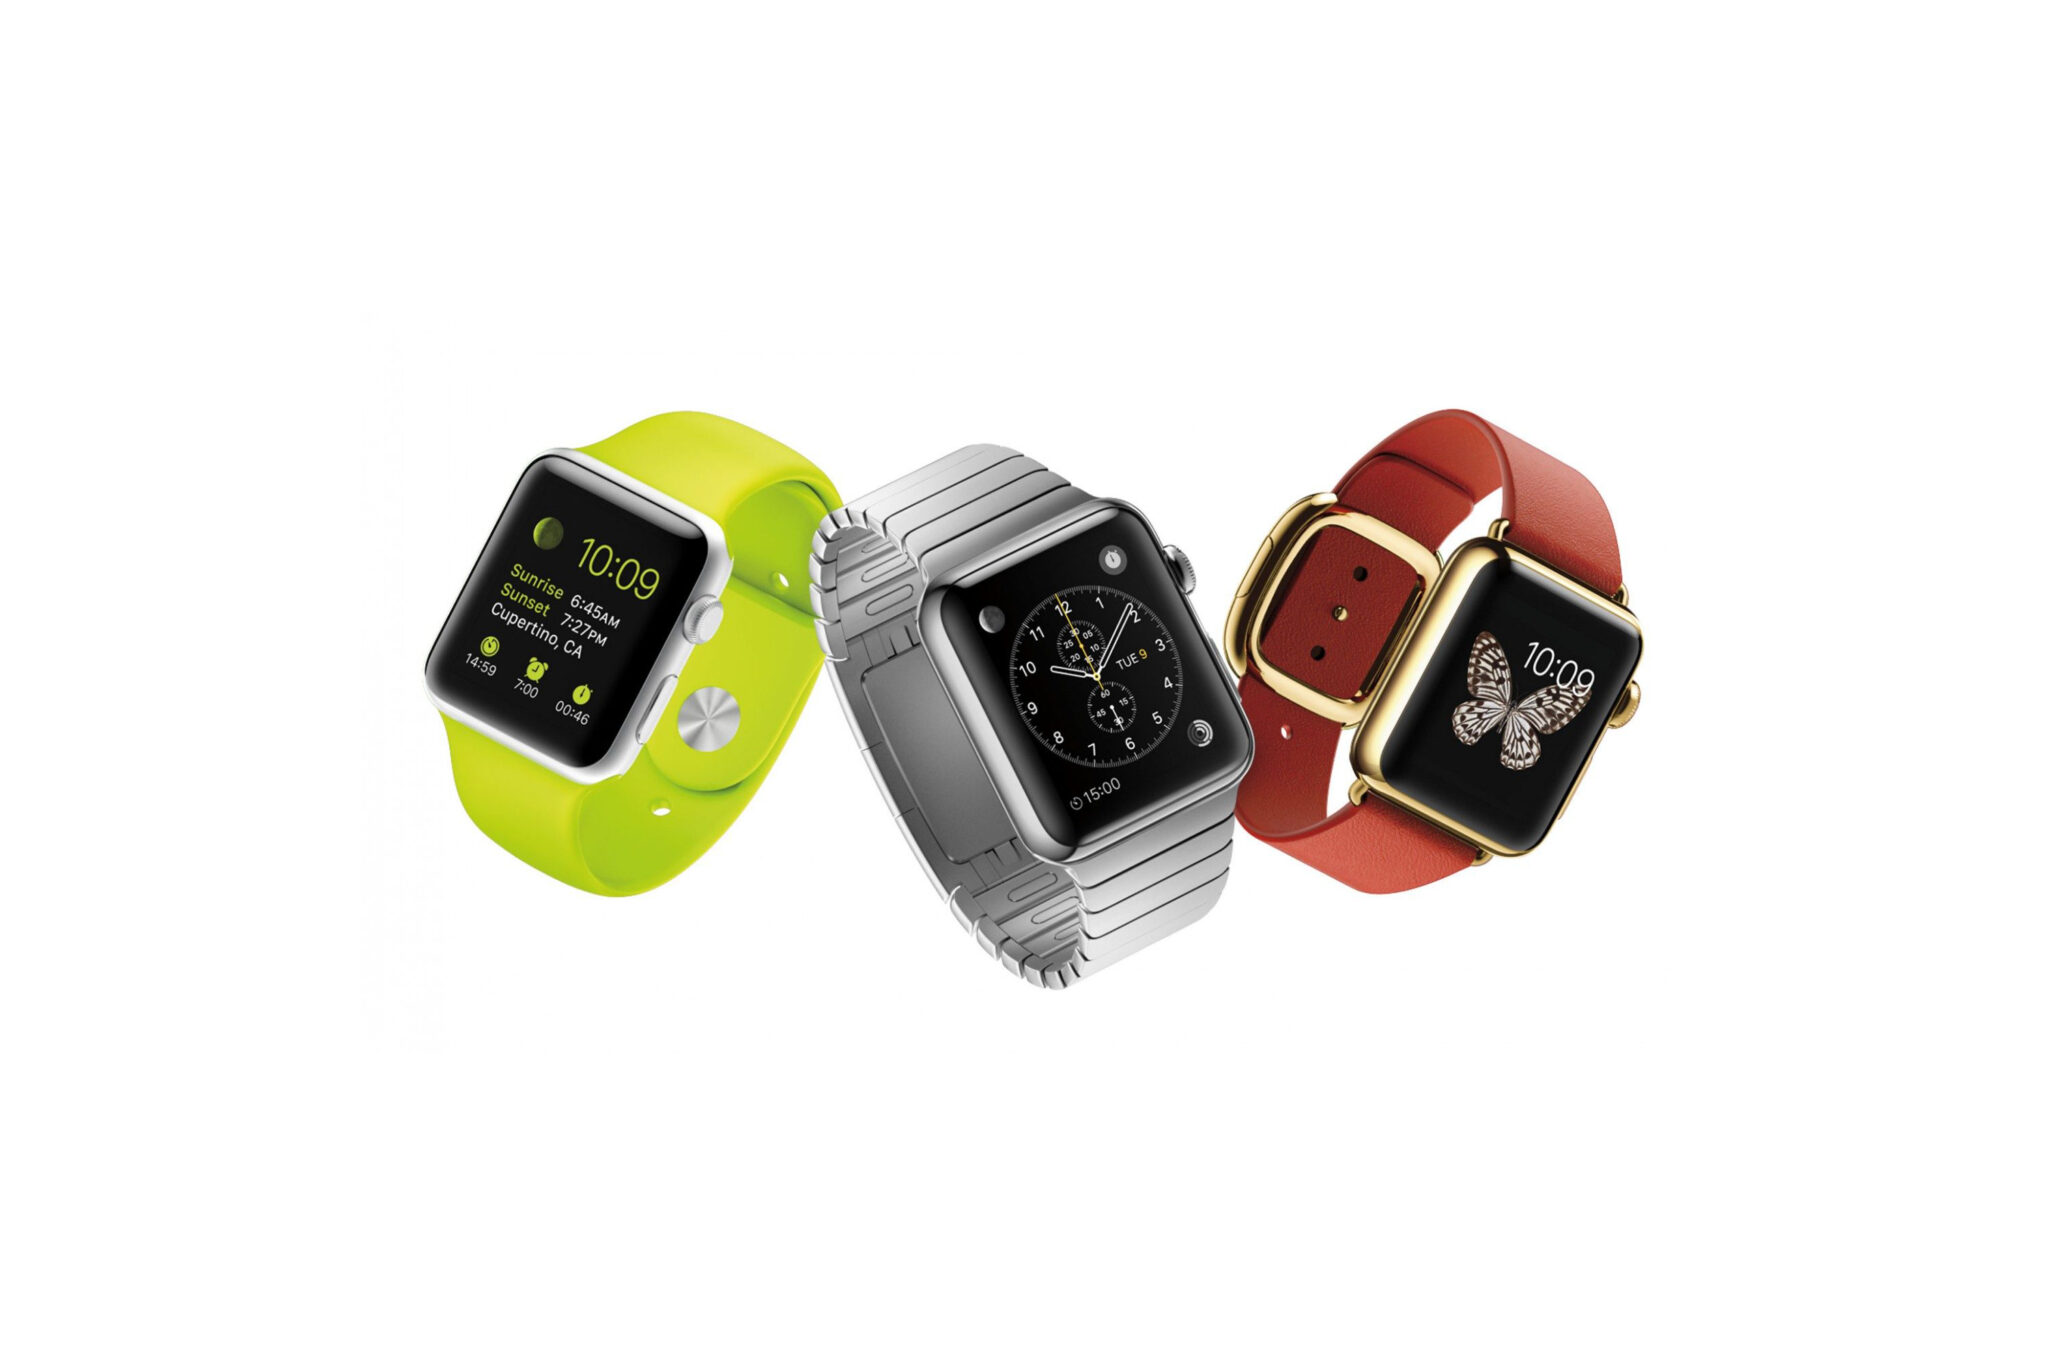 Original Apple Watch Tech Specs, Features, Release Date, and Price